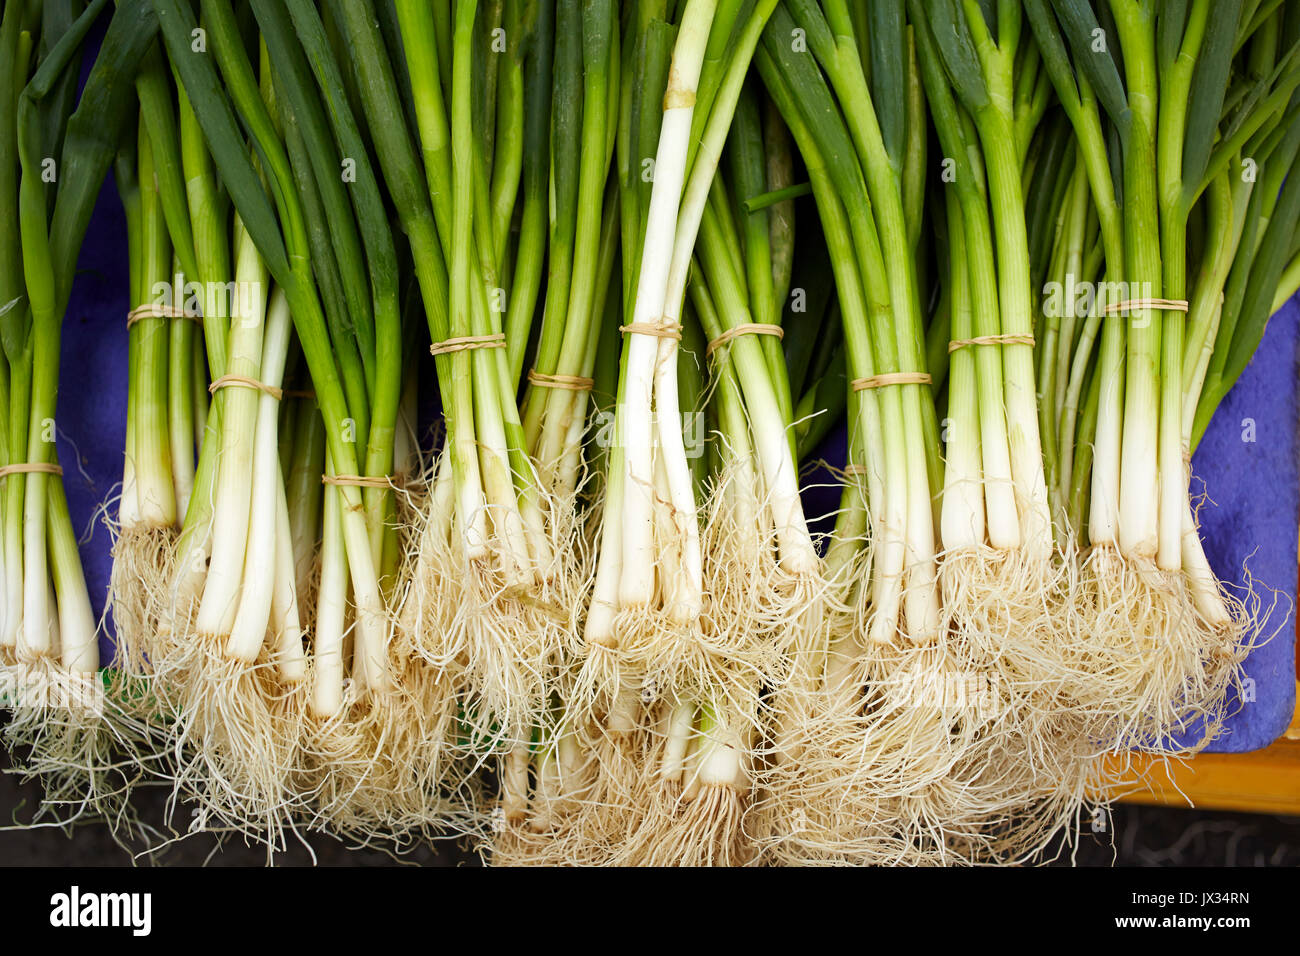 bunches of fresh green spring onions Stock Photo